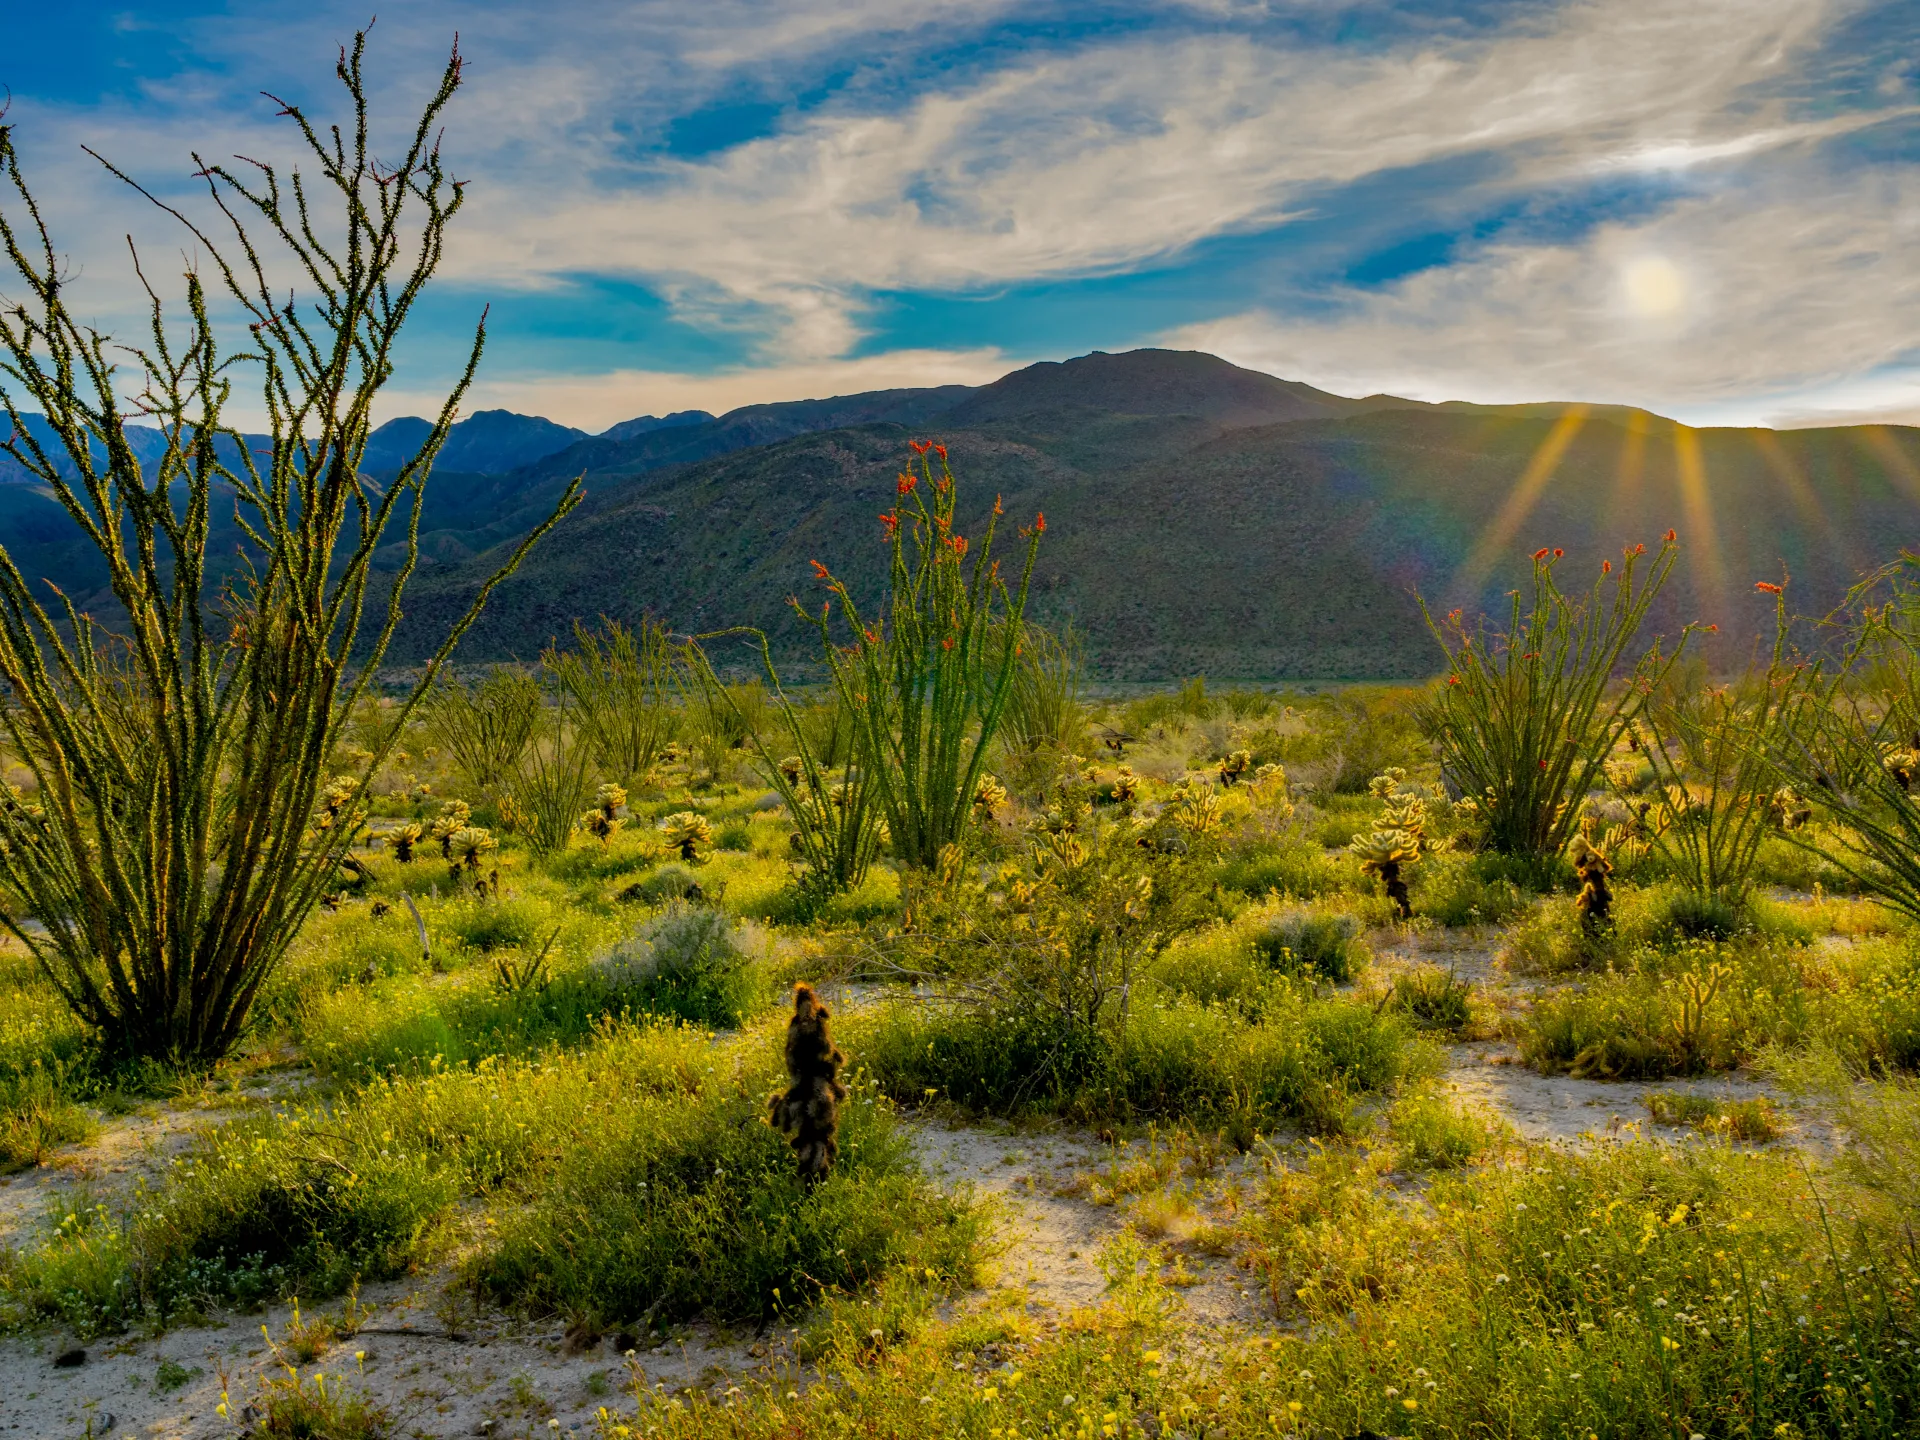 In 2021, over 17,500 acres of land were added to Anza-Borrego Desert State Park 